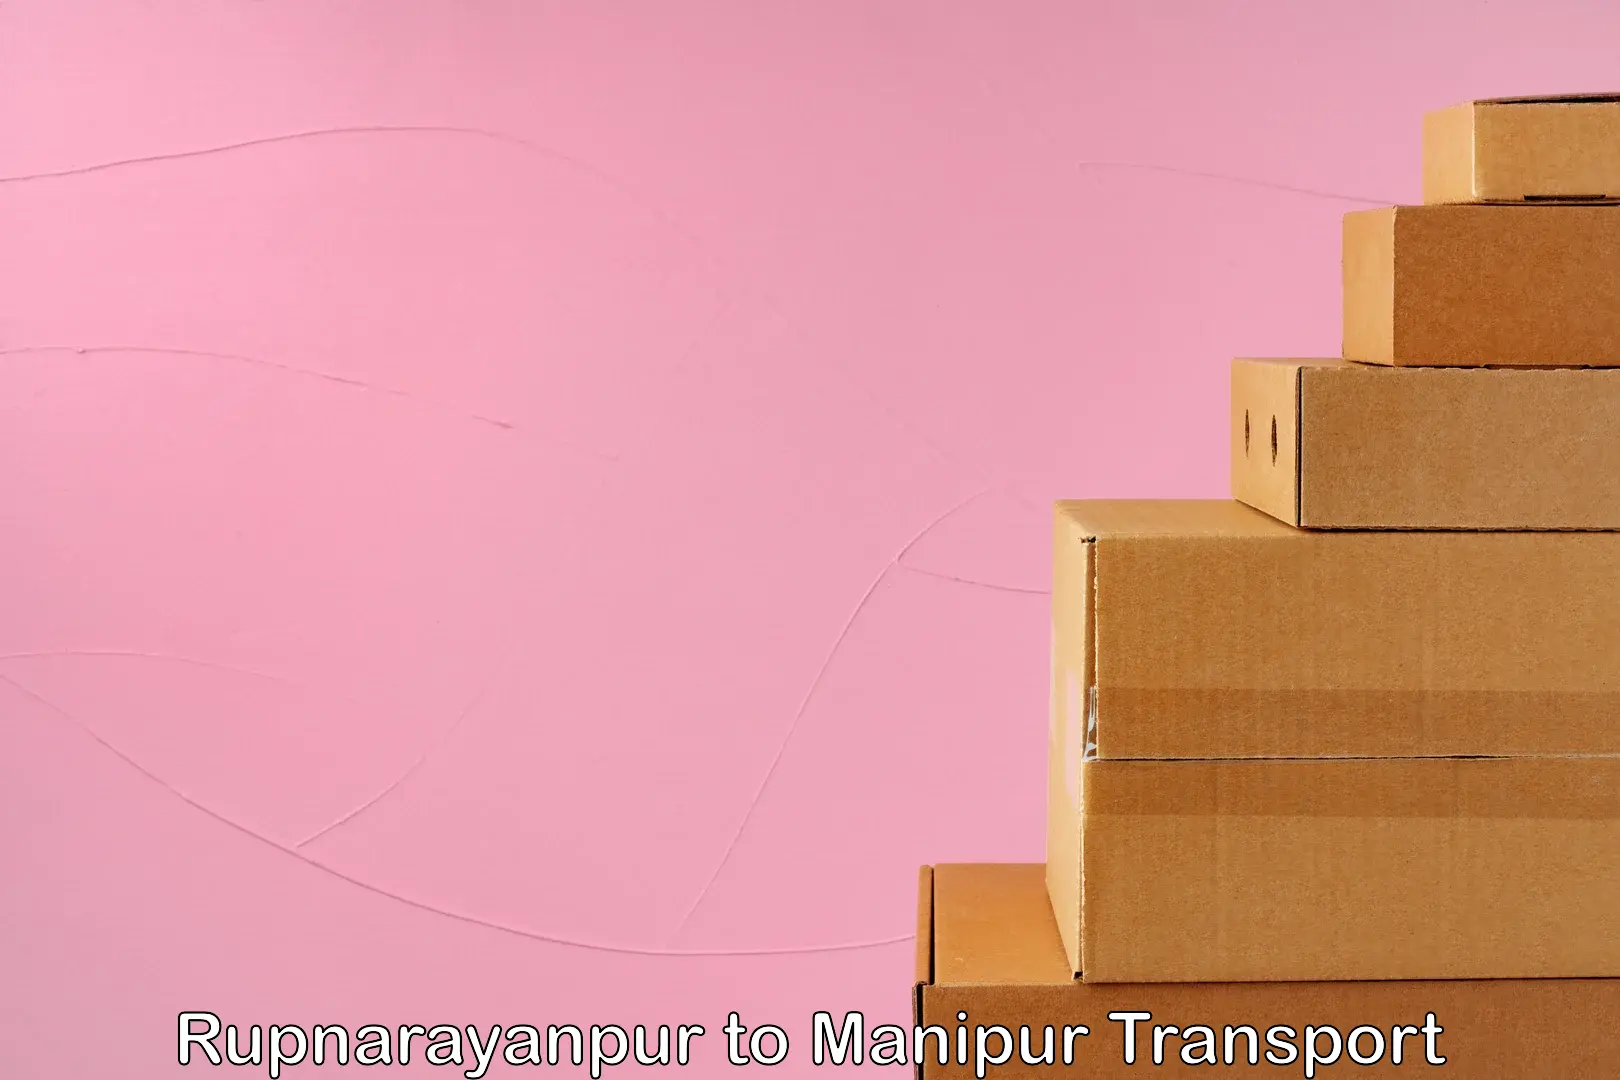 Container transport service Rupnarayanpur to Manipur